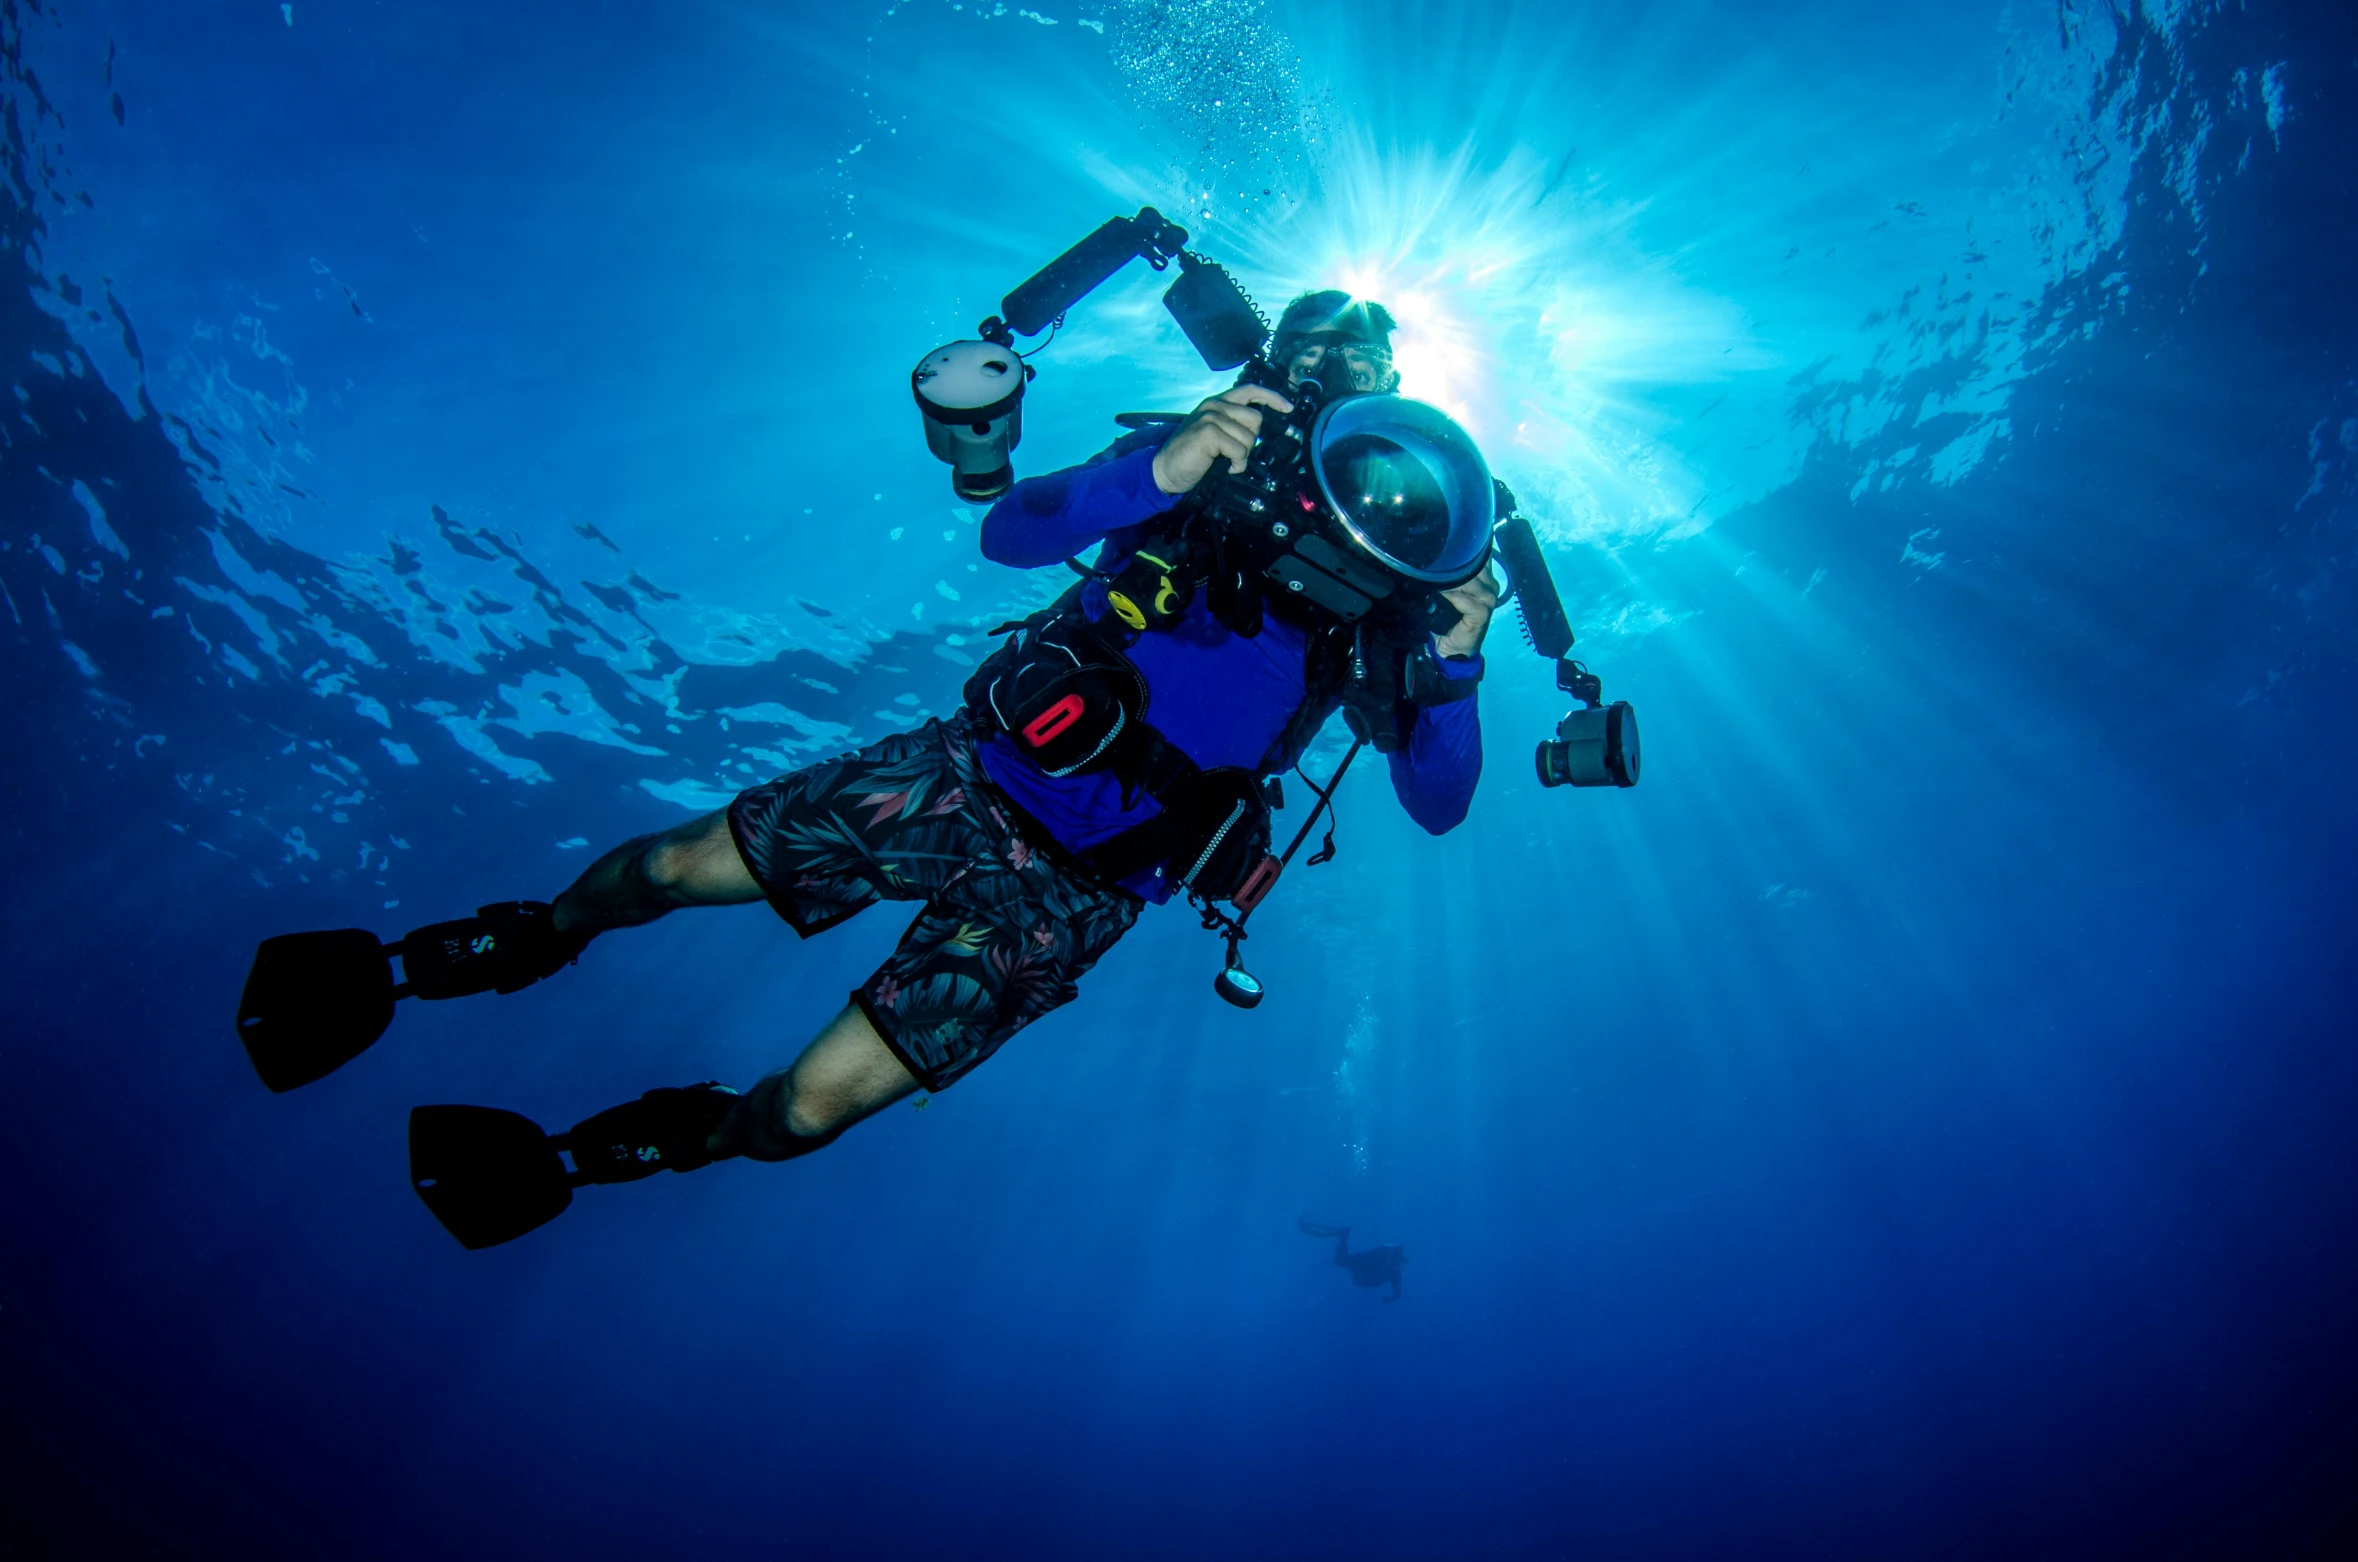 a person diving in the ocean with a camera, a portrait, by Dan Content, happening, blue planet still, avatar image, naoki ikushima, full device